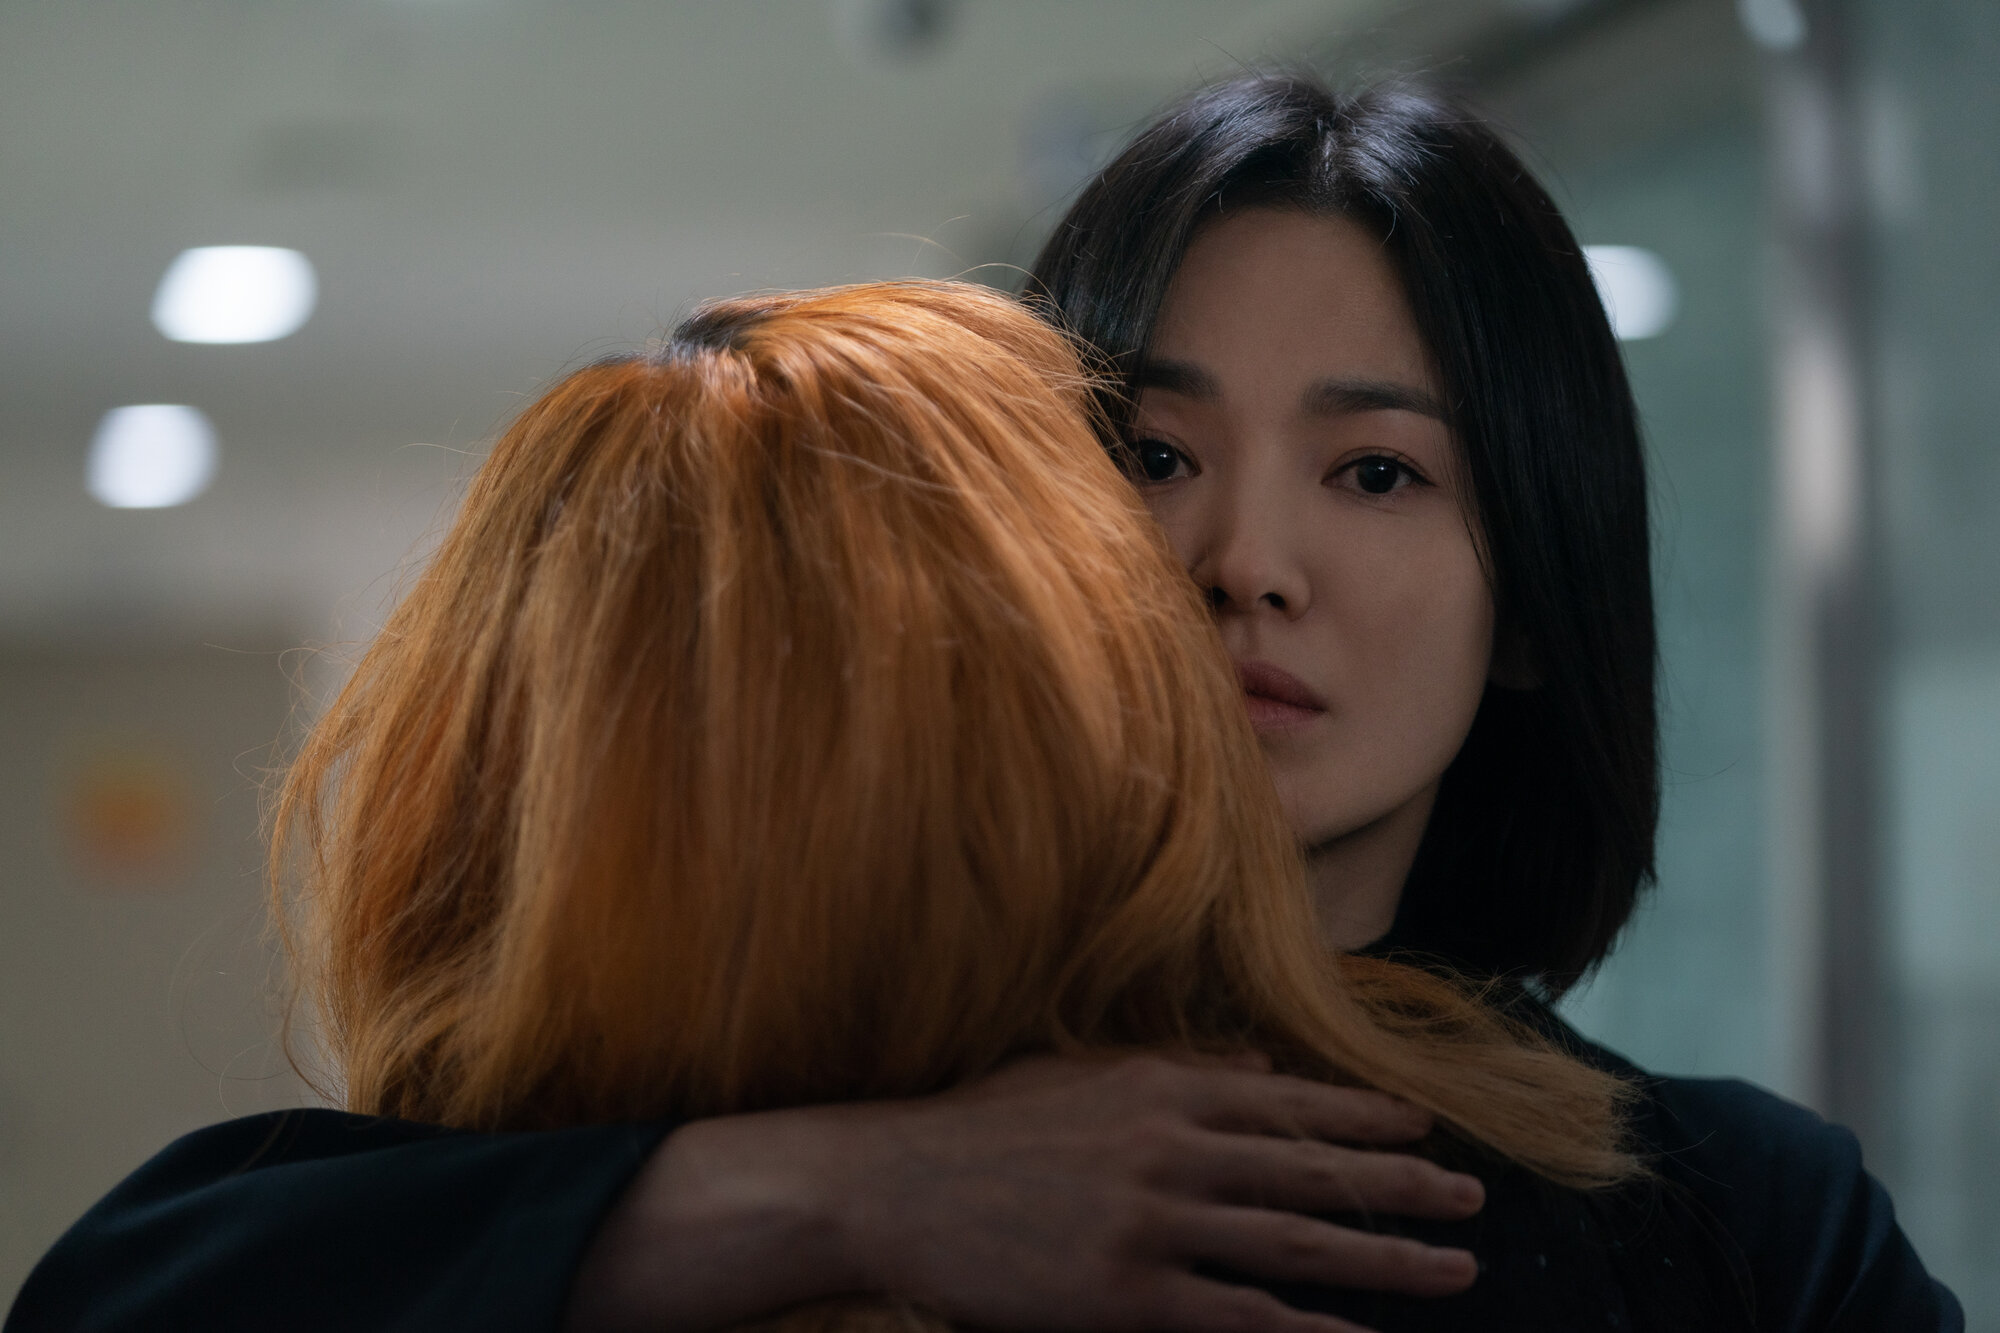 The Glory Part 2 brings a chilling end to Netflixs revenge drama starring Song Hye-kyo